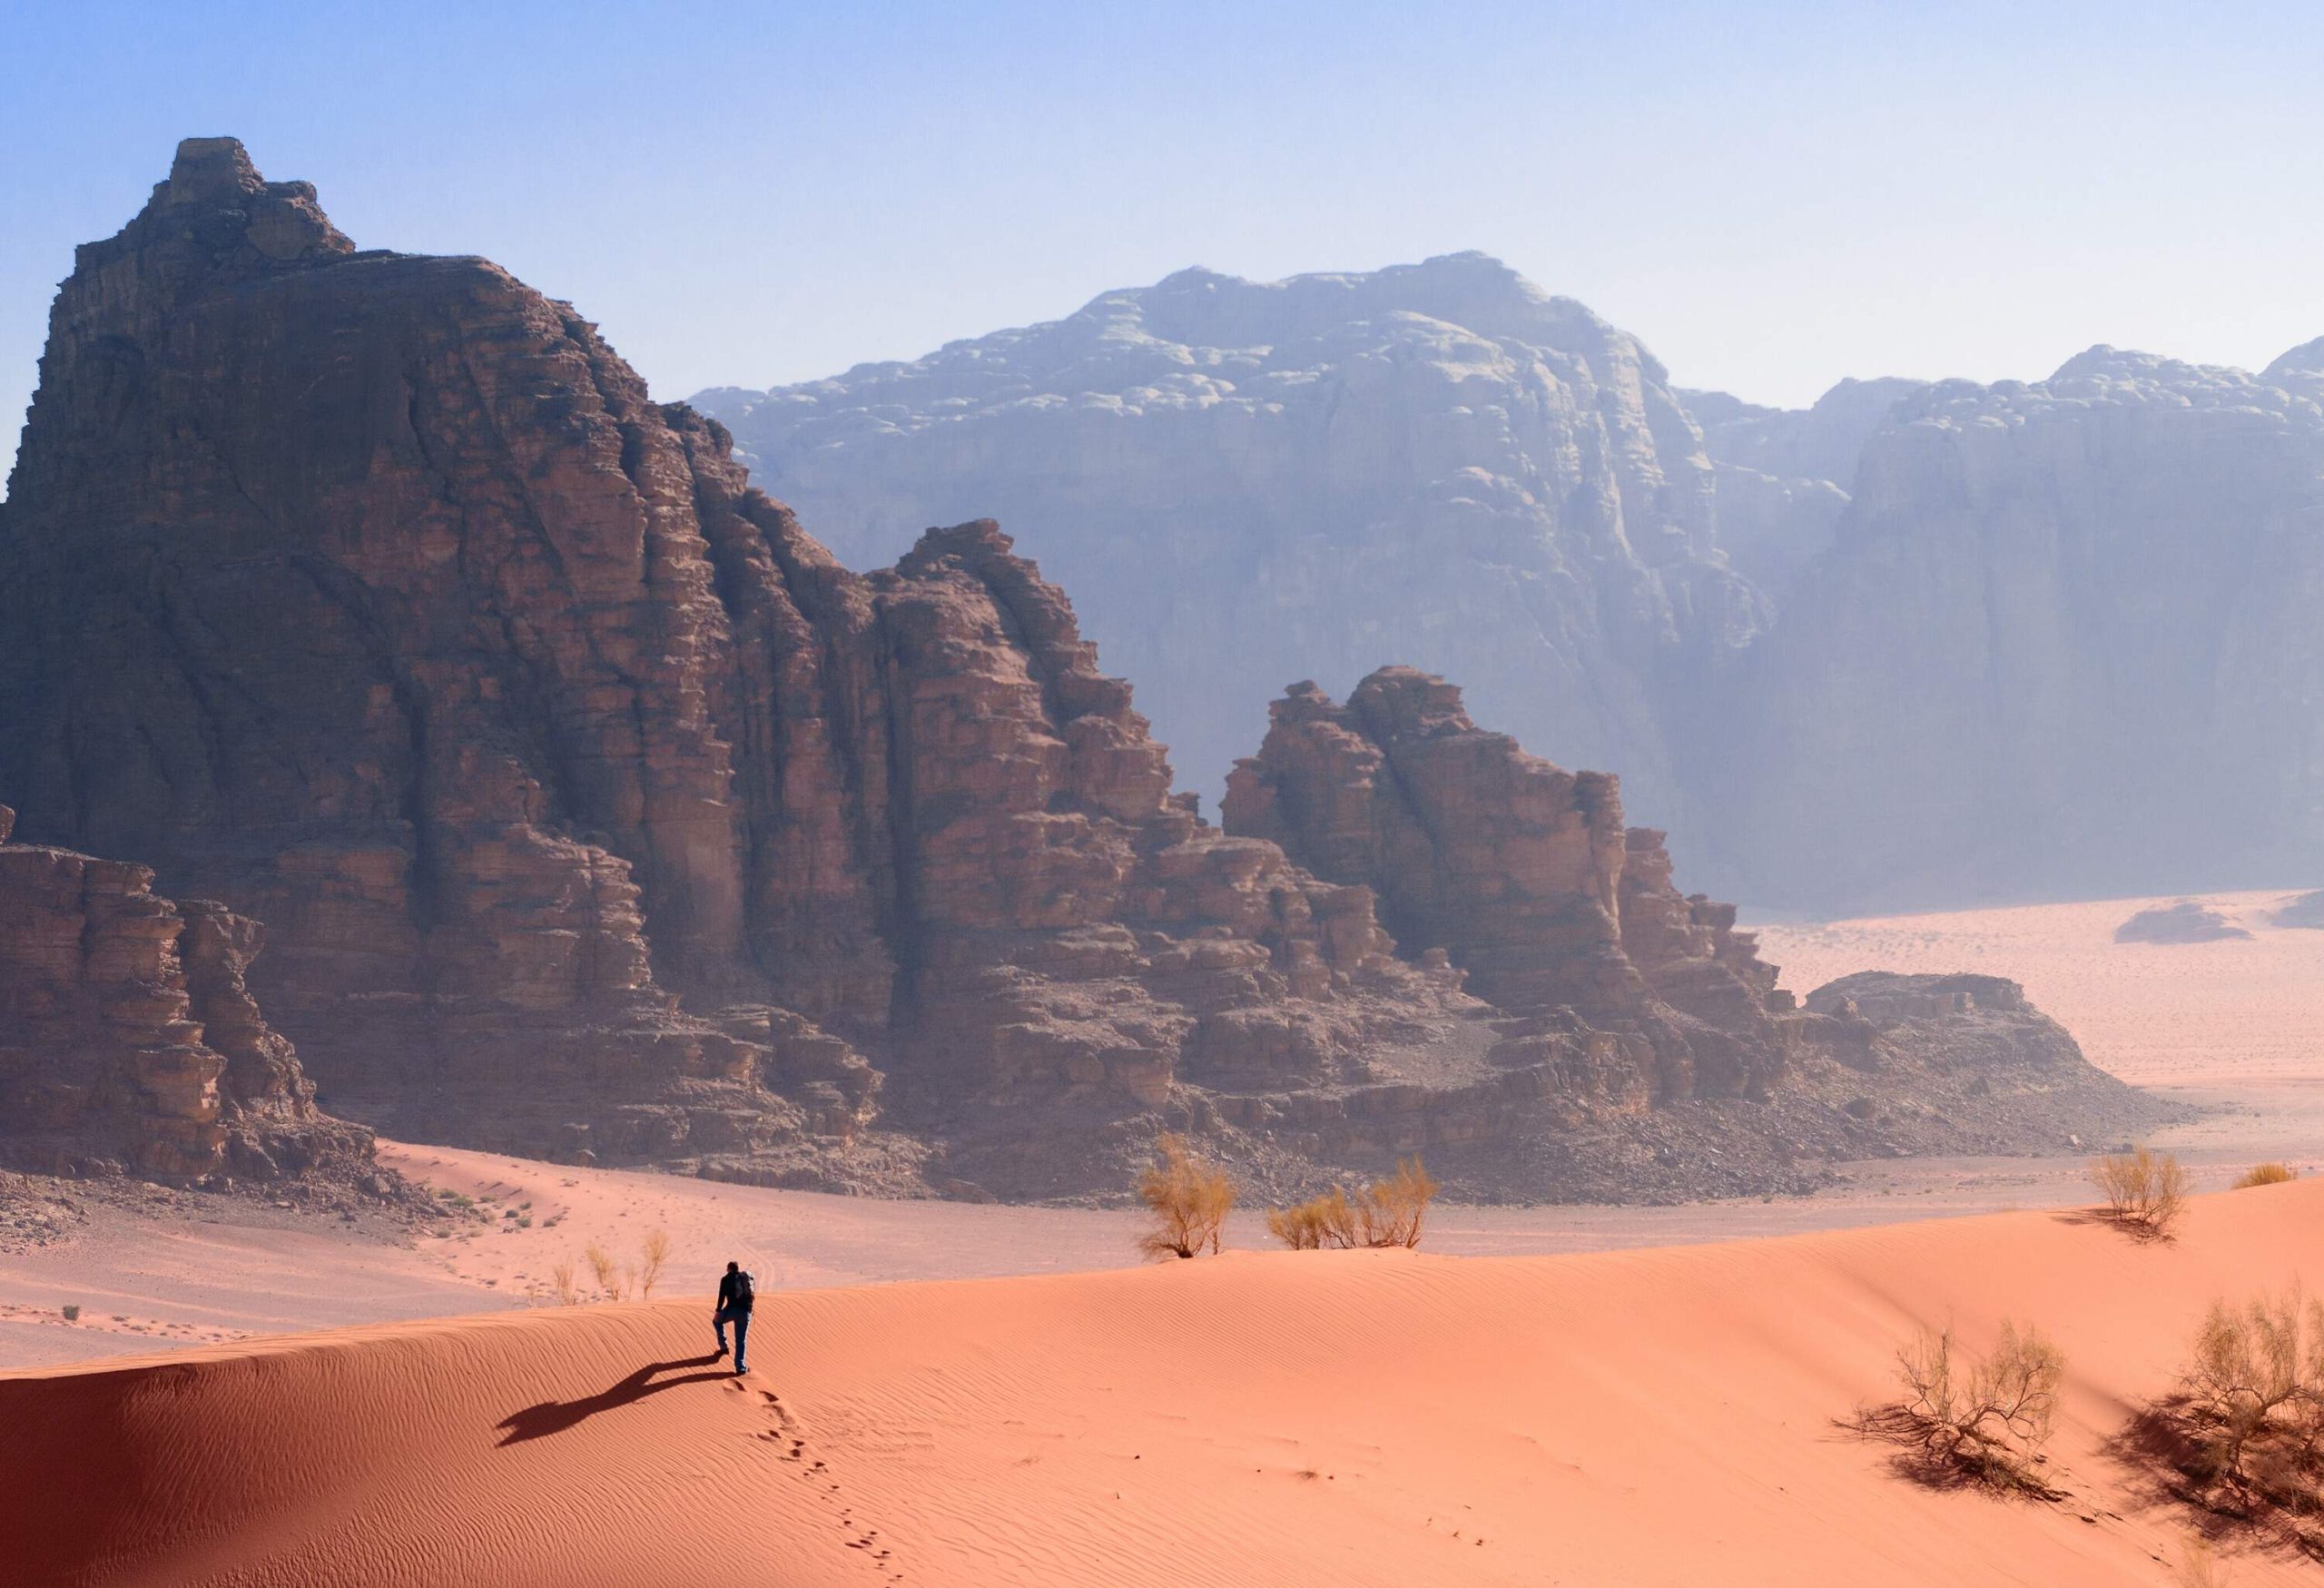 A man walking across a sand dune towards the sandstone mountains in the valley.